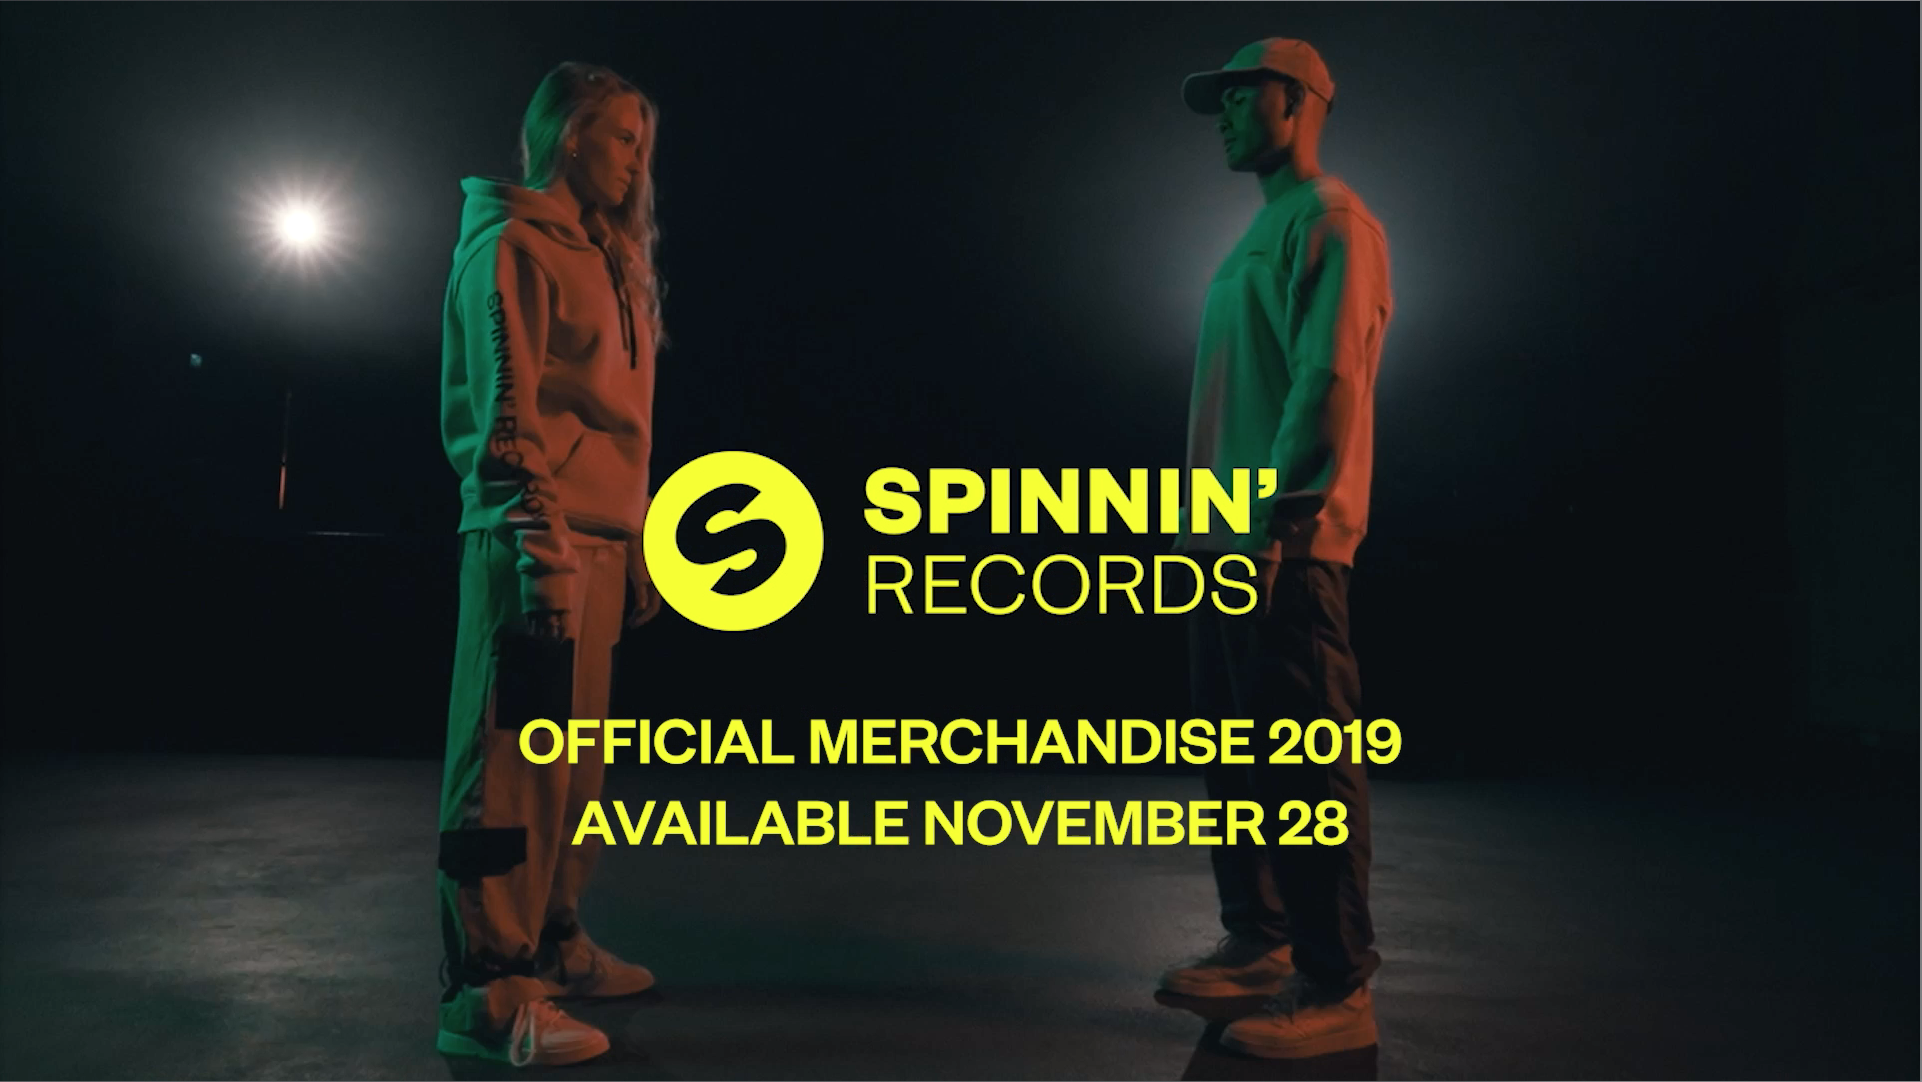 Spinnin' Records | Official Merchandise 2019 - Coming Soon